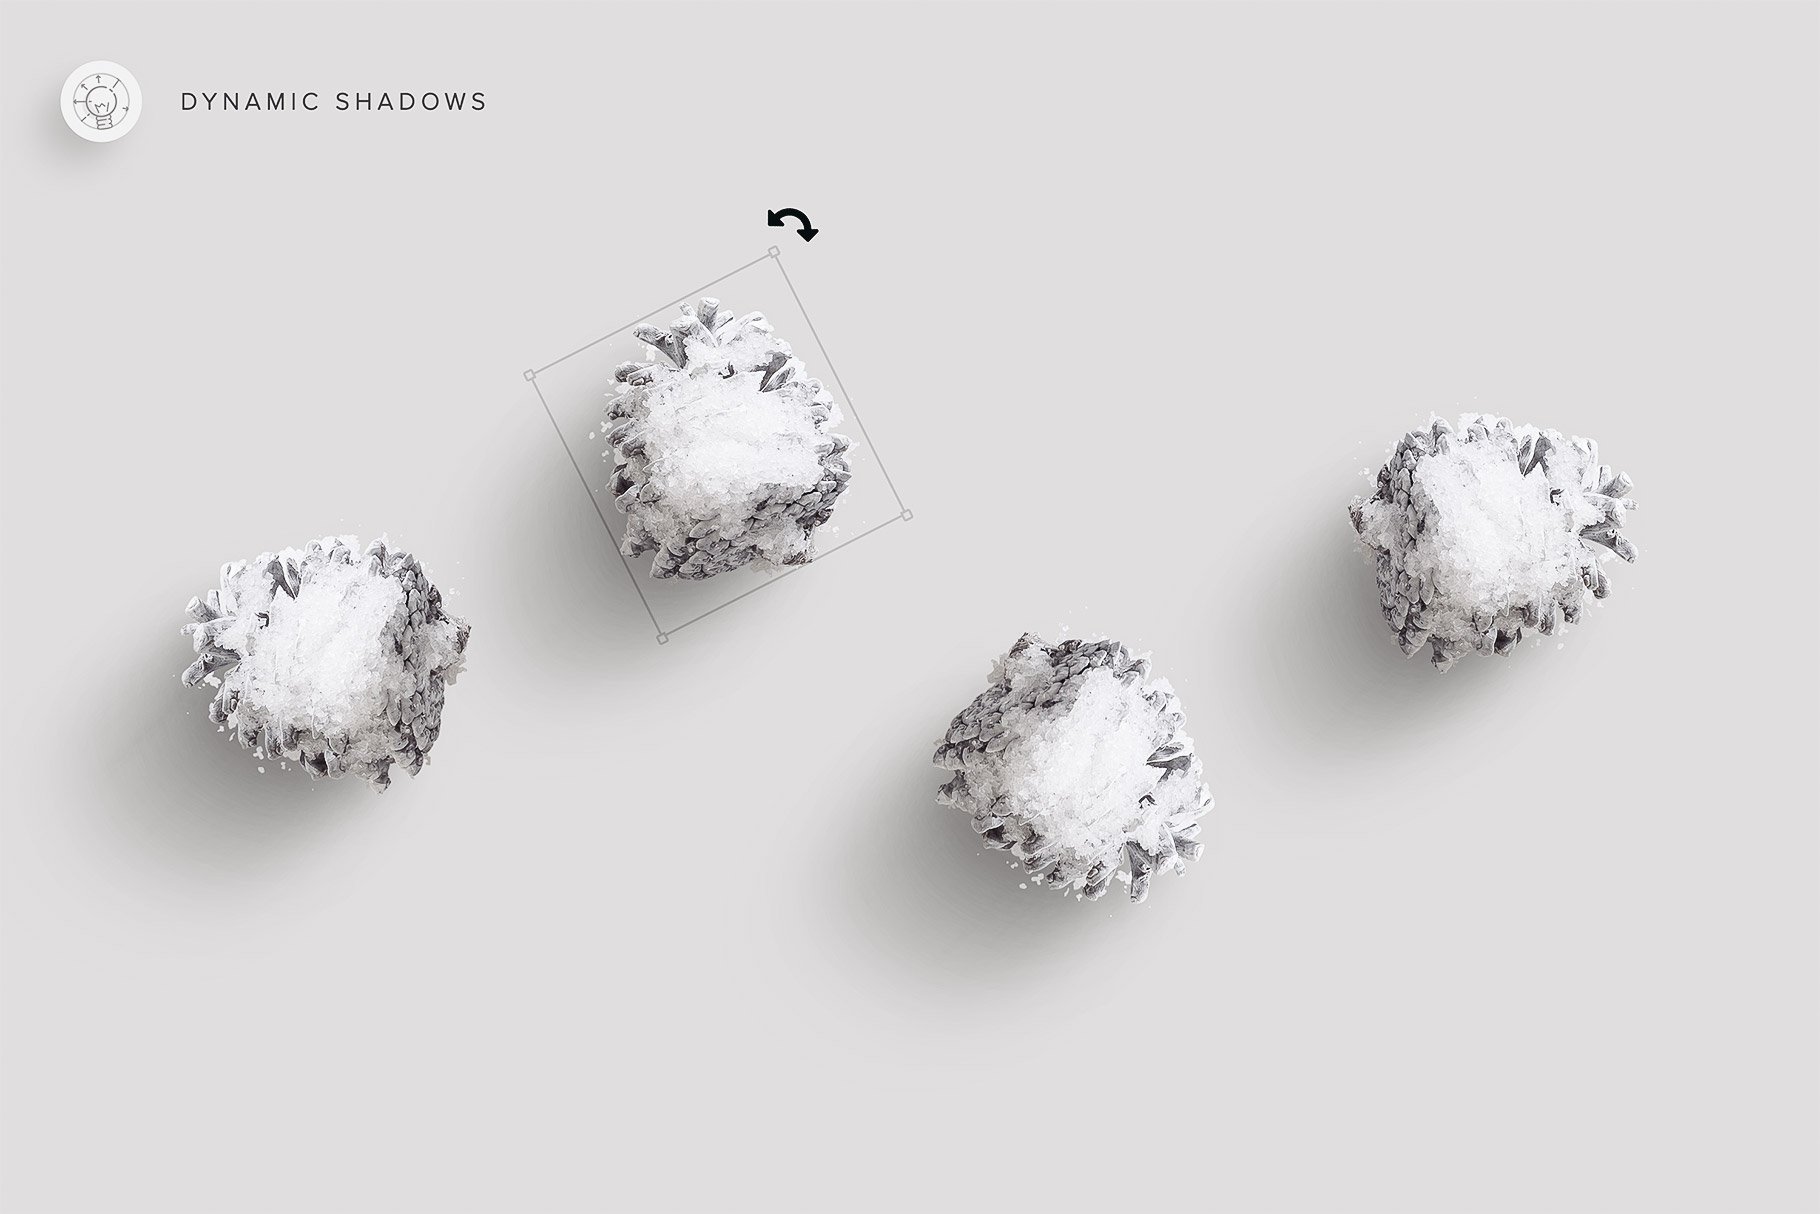 isolated objects snow feature dynamicshadows customscene 434